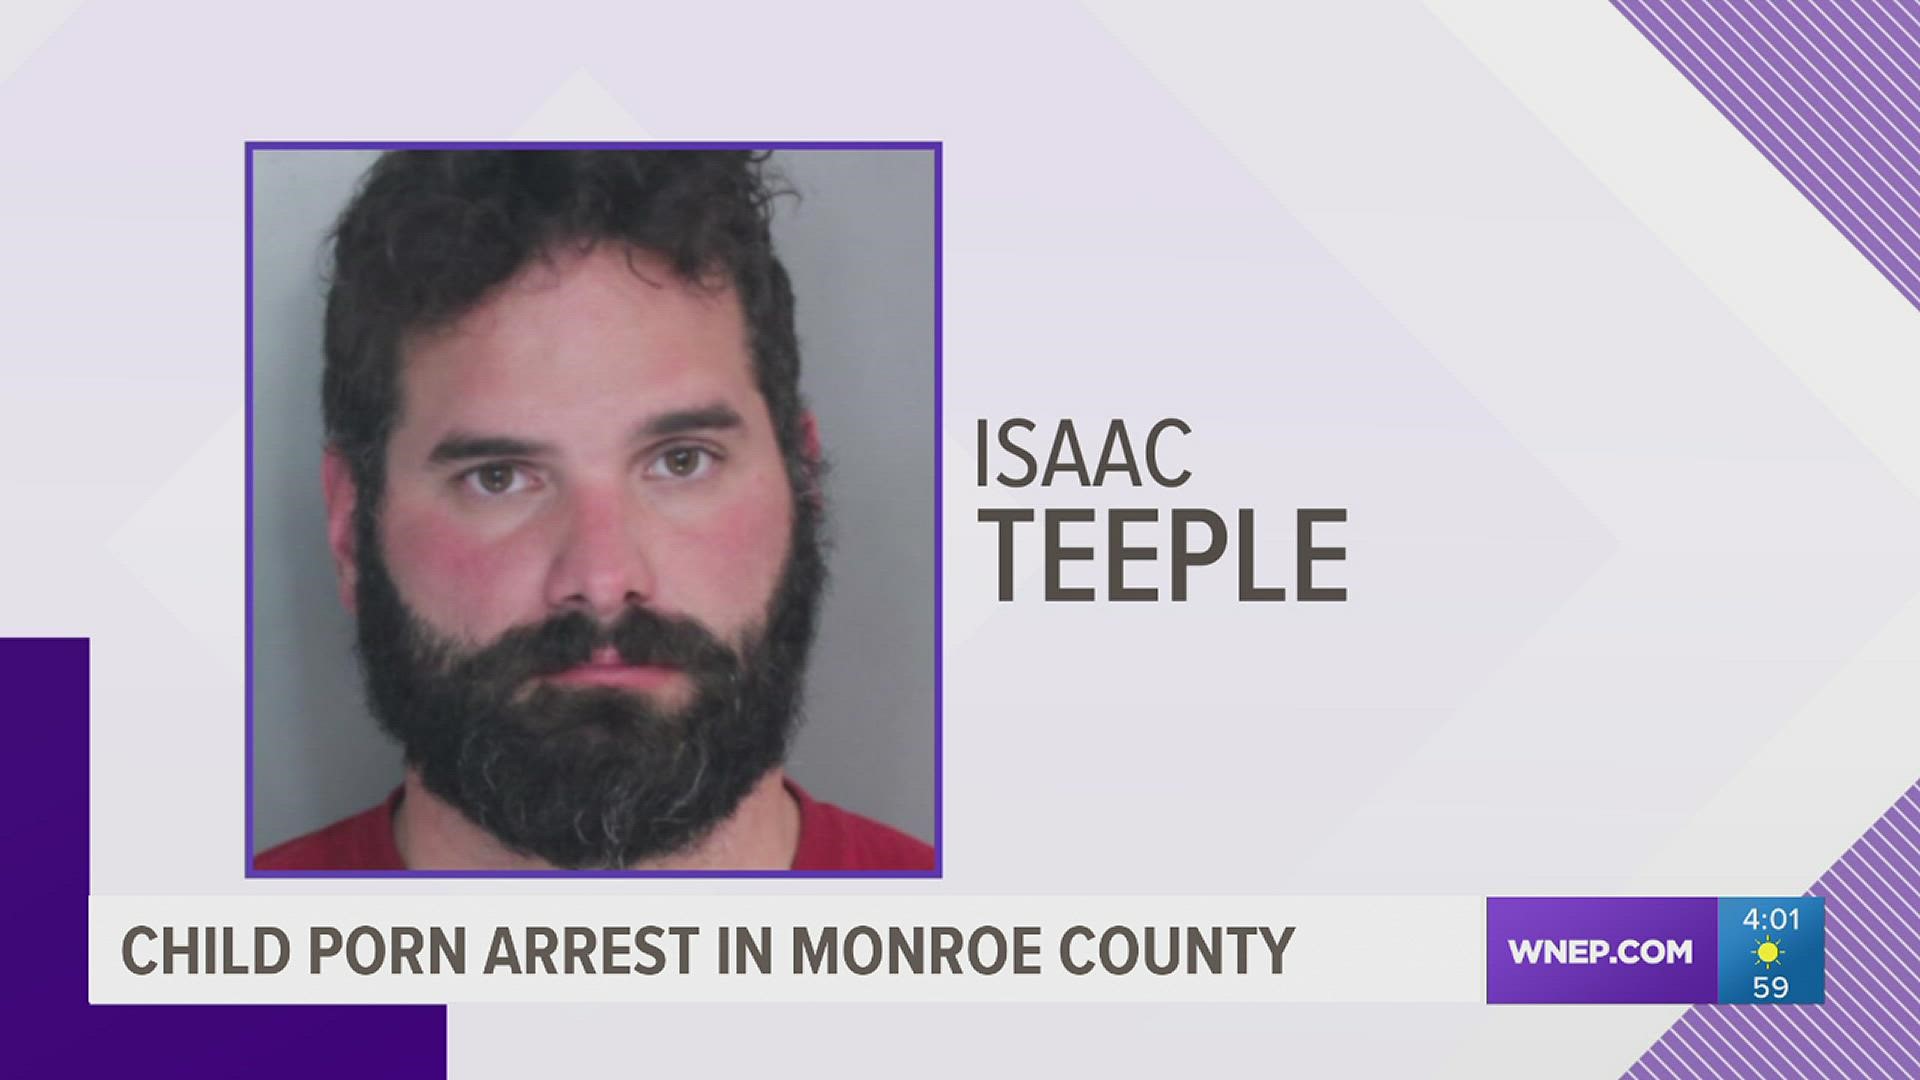 After failing to post $500,000 secured bail Isaac Teeple is locked up in Monroe County.